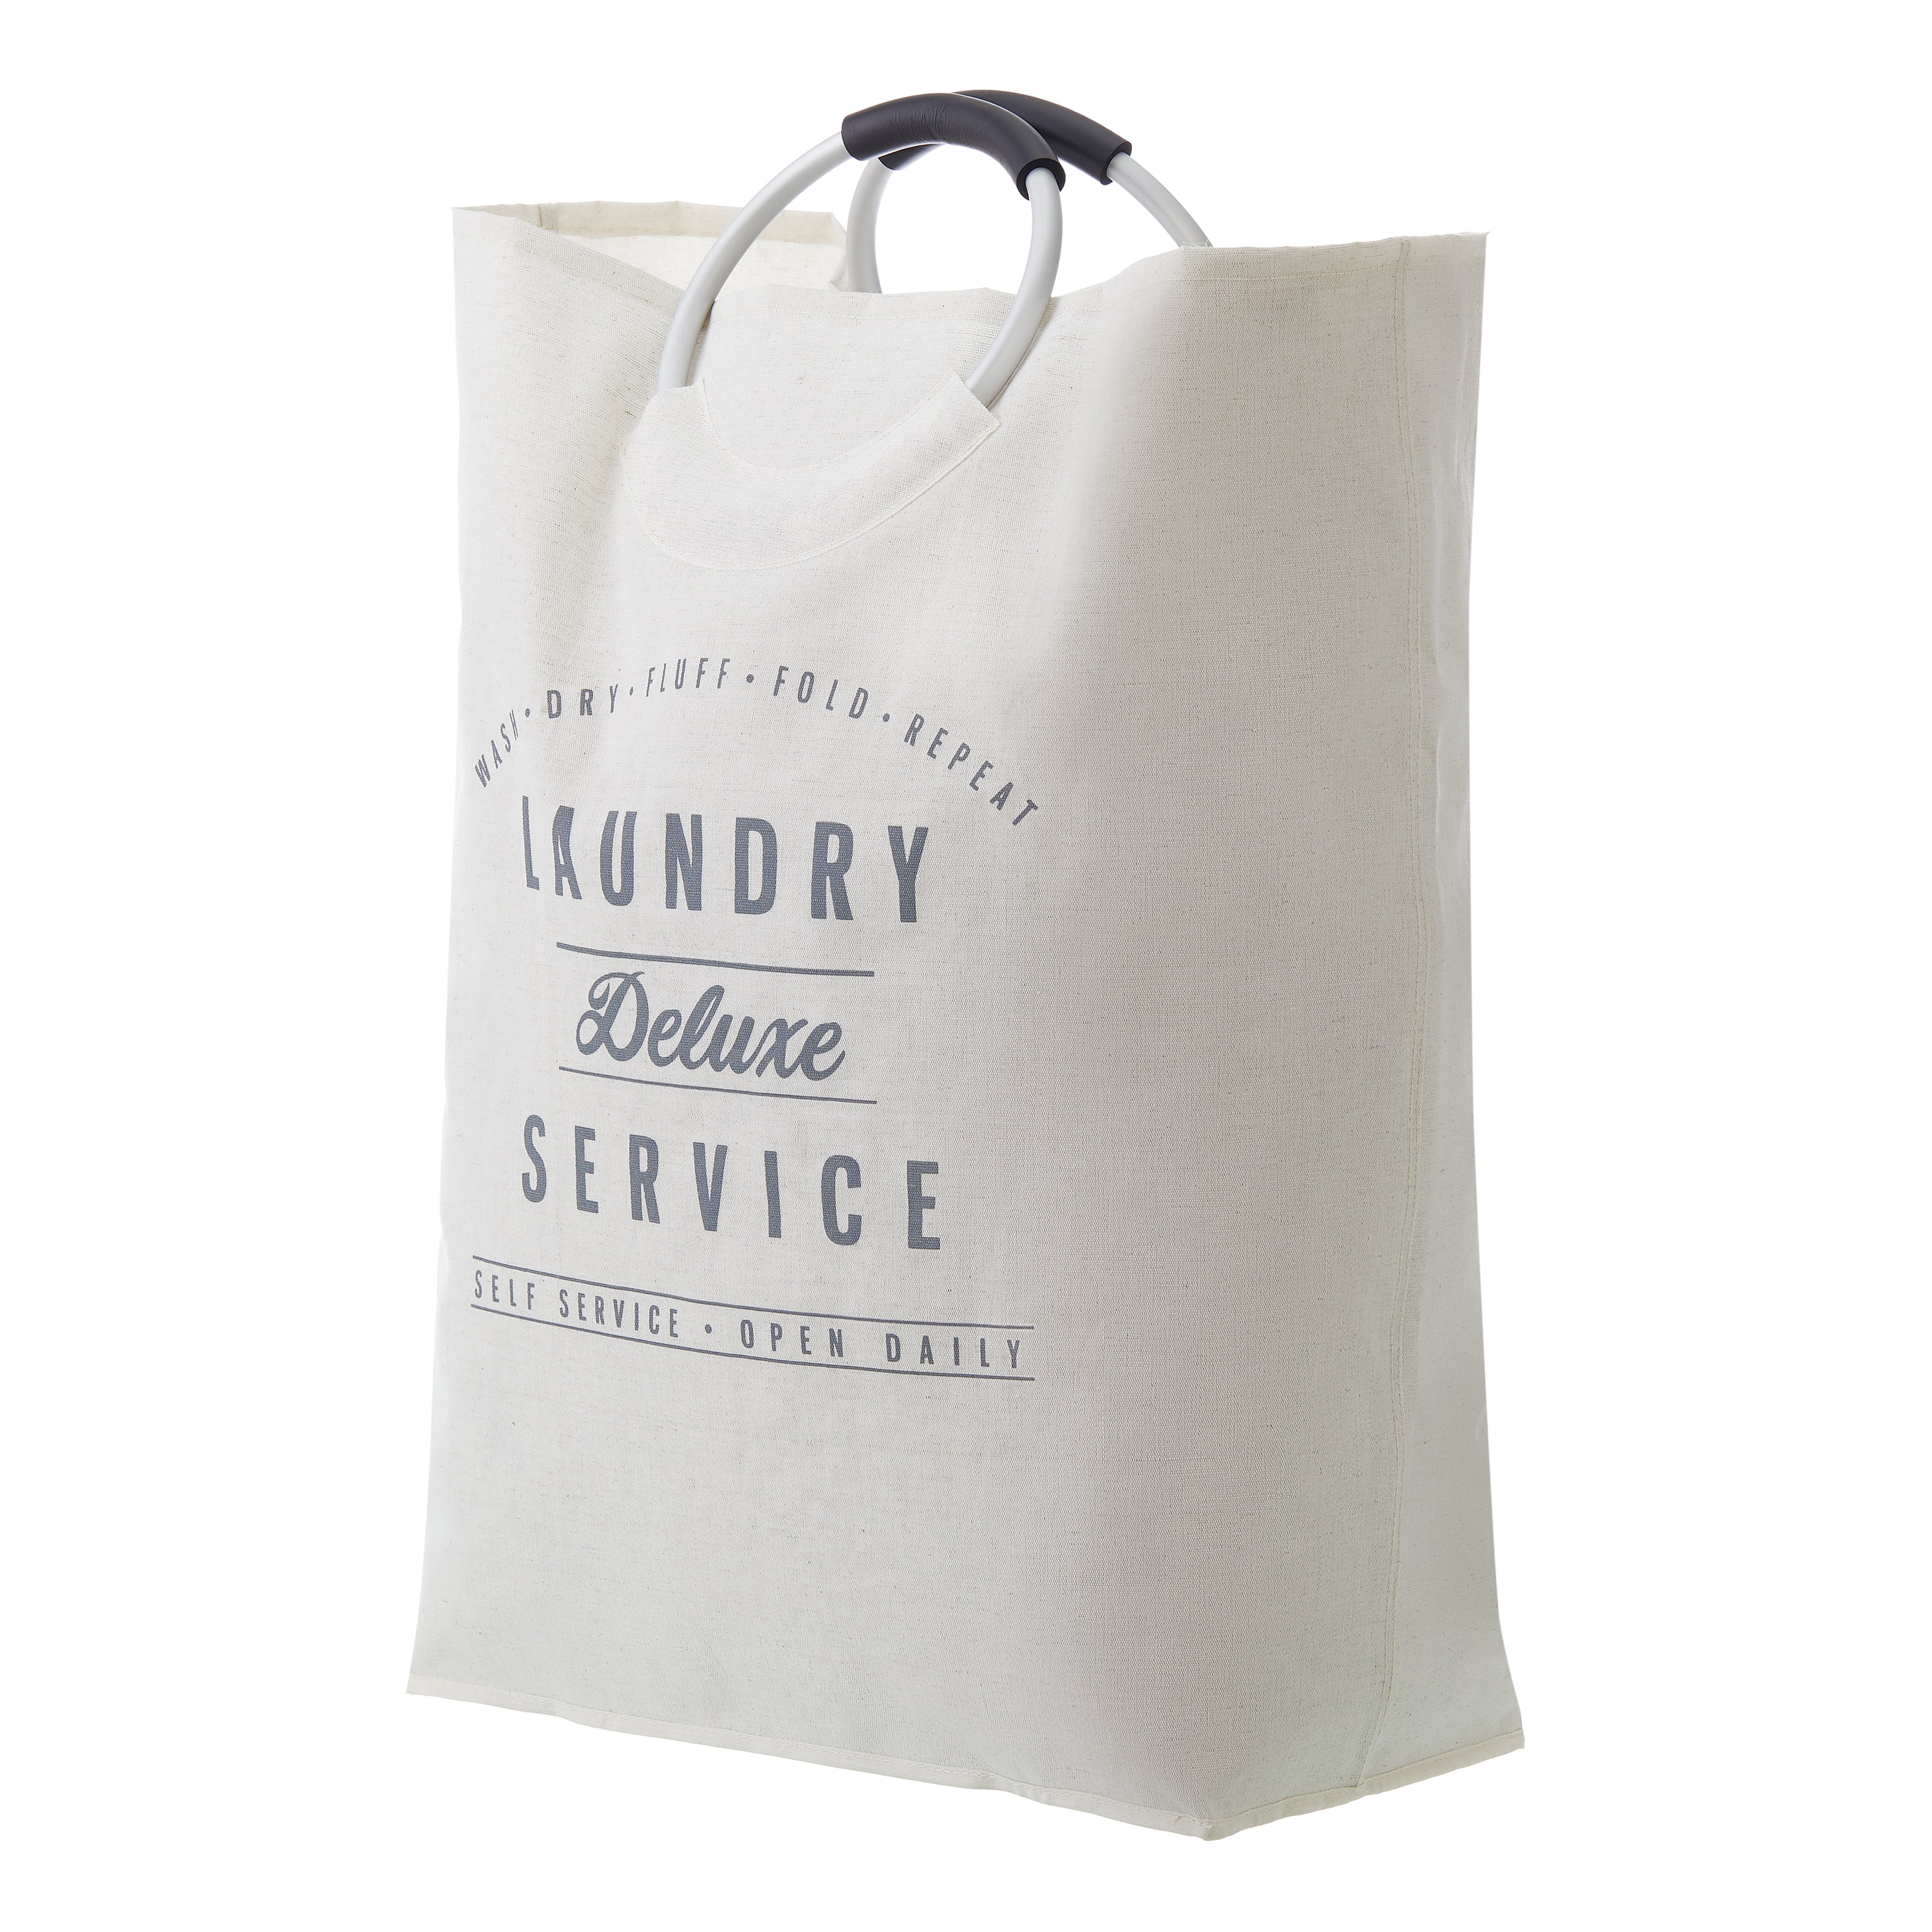 Better Homes & Gardens Laundry Deluxe Service Canvas Tote - 17 x 8.5 x 25.25 in